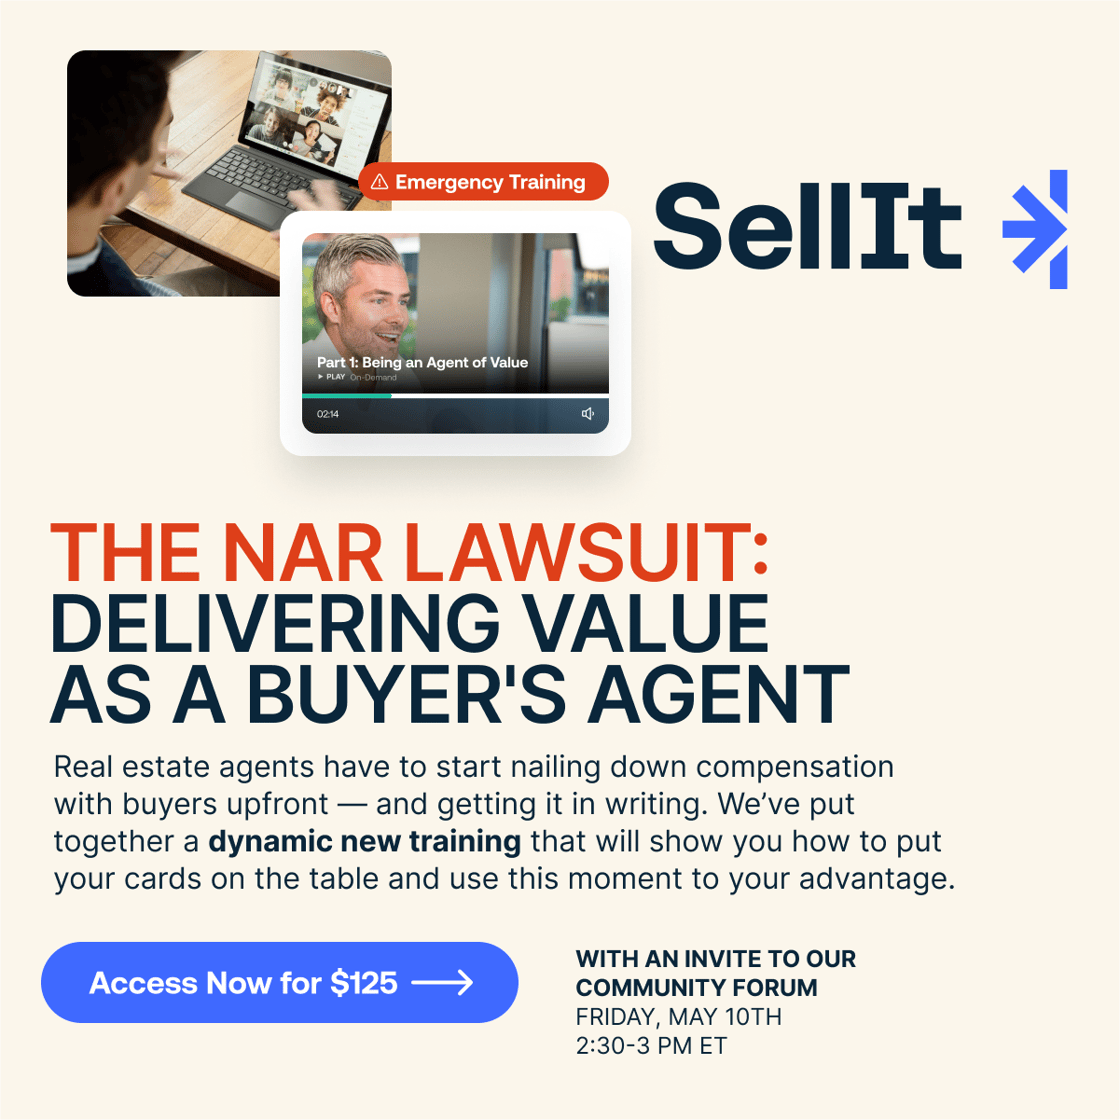 NEW TRAINING - THE NAR LAWSUIT- DELIVERING VALUE AS A BUYER'S AGENT